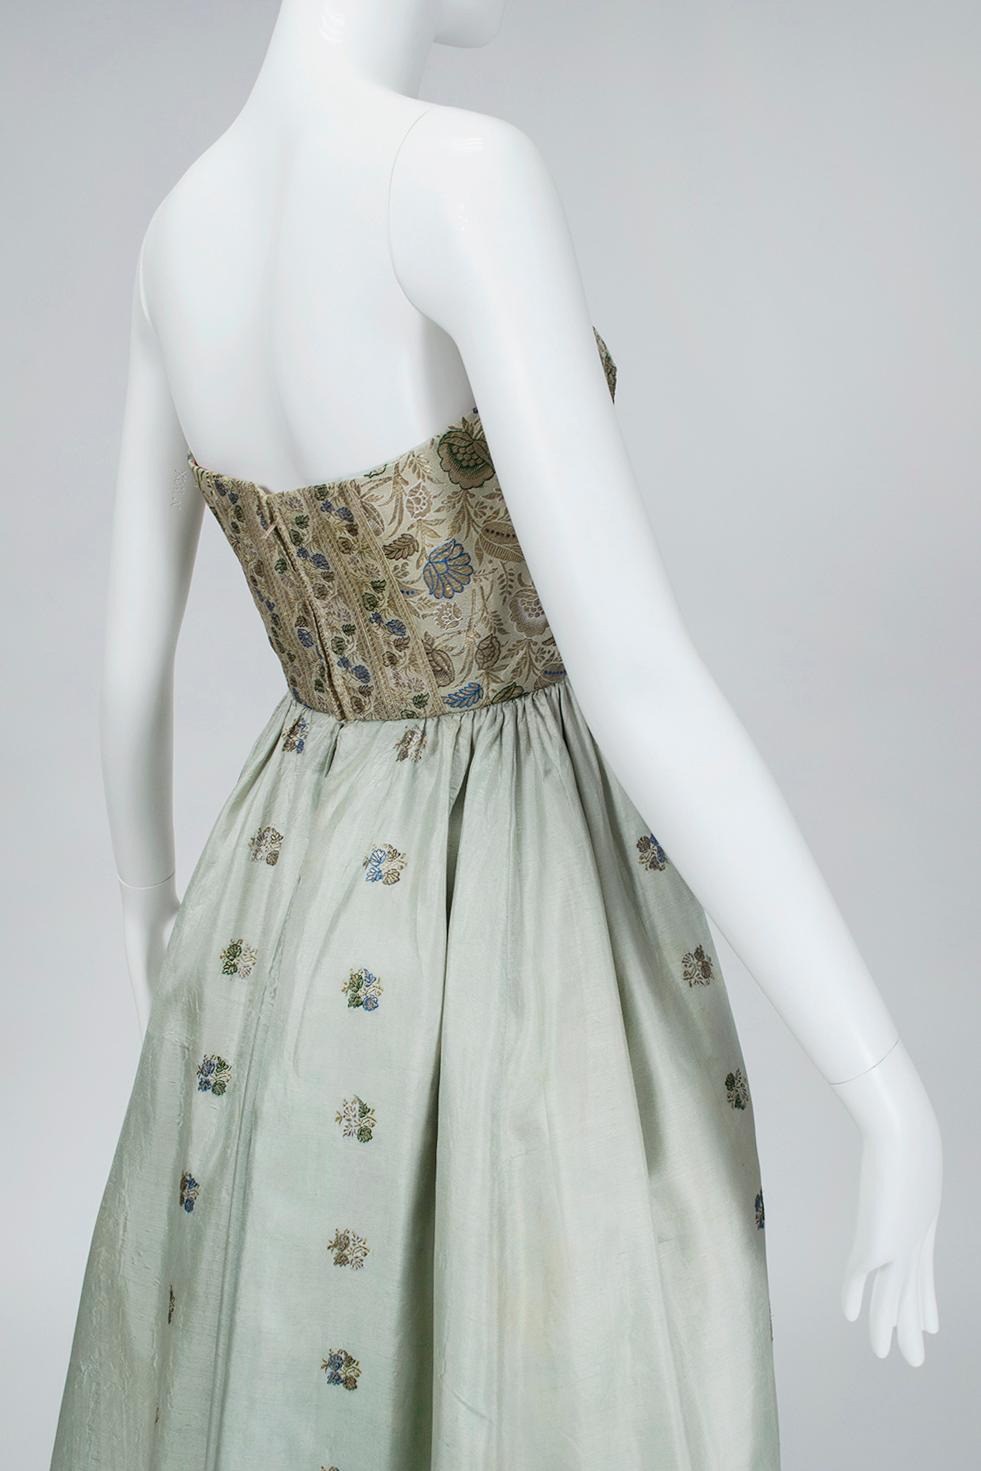 Jacques Cassia Couture Strapless Silver Brocade Party Dress - S, 1950s In Good Condition For Sale In Tucson, AZ